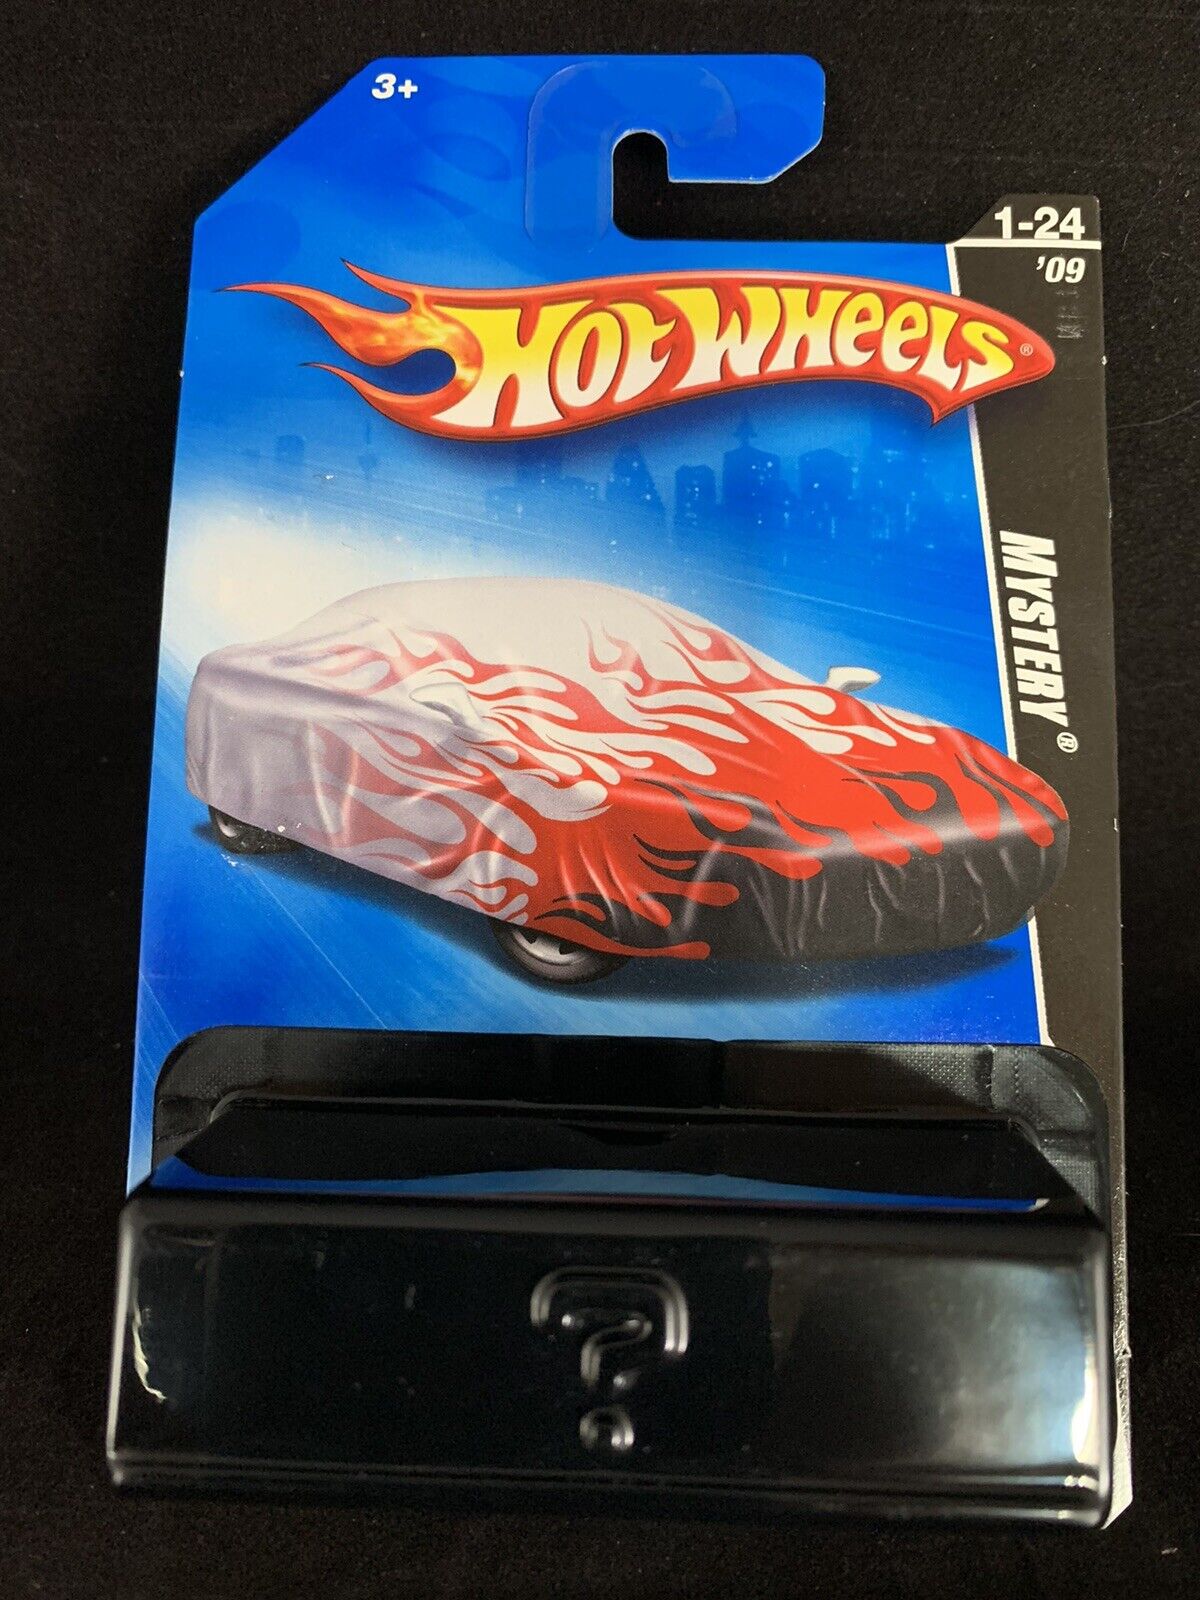 2009 \'09 HOT WHEELS - MYSTERY CARS - NEW UNOPENED - #167 to #190